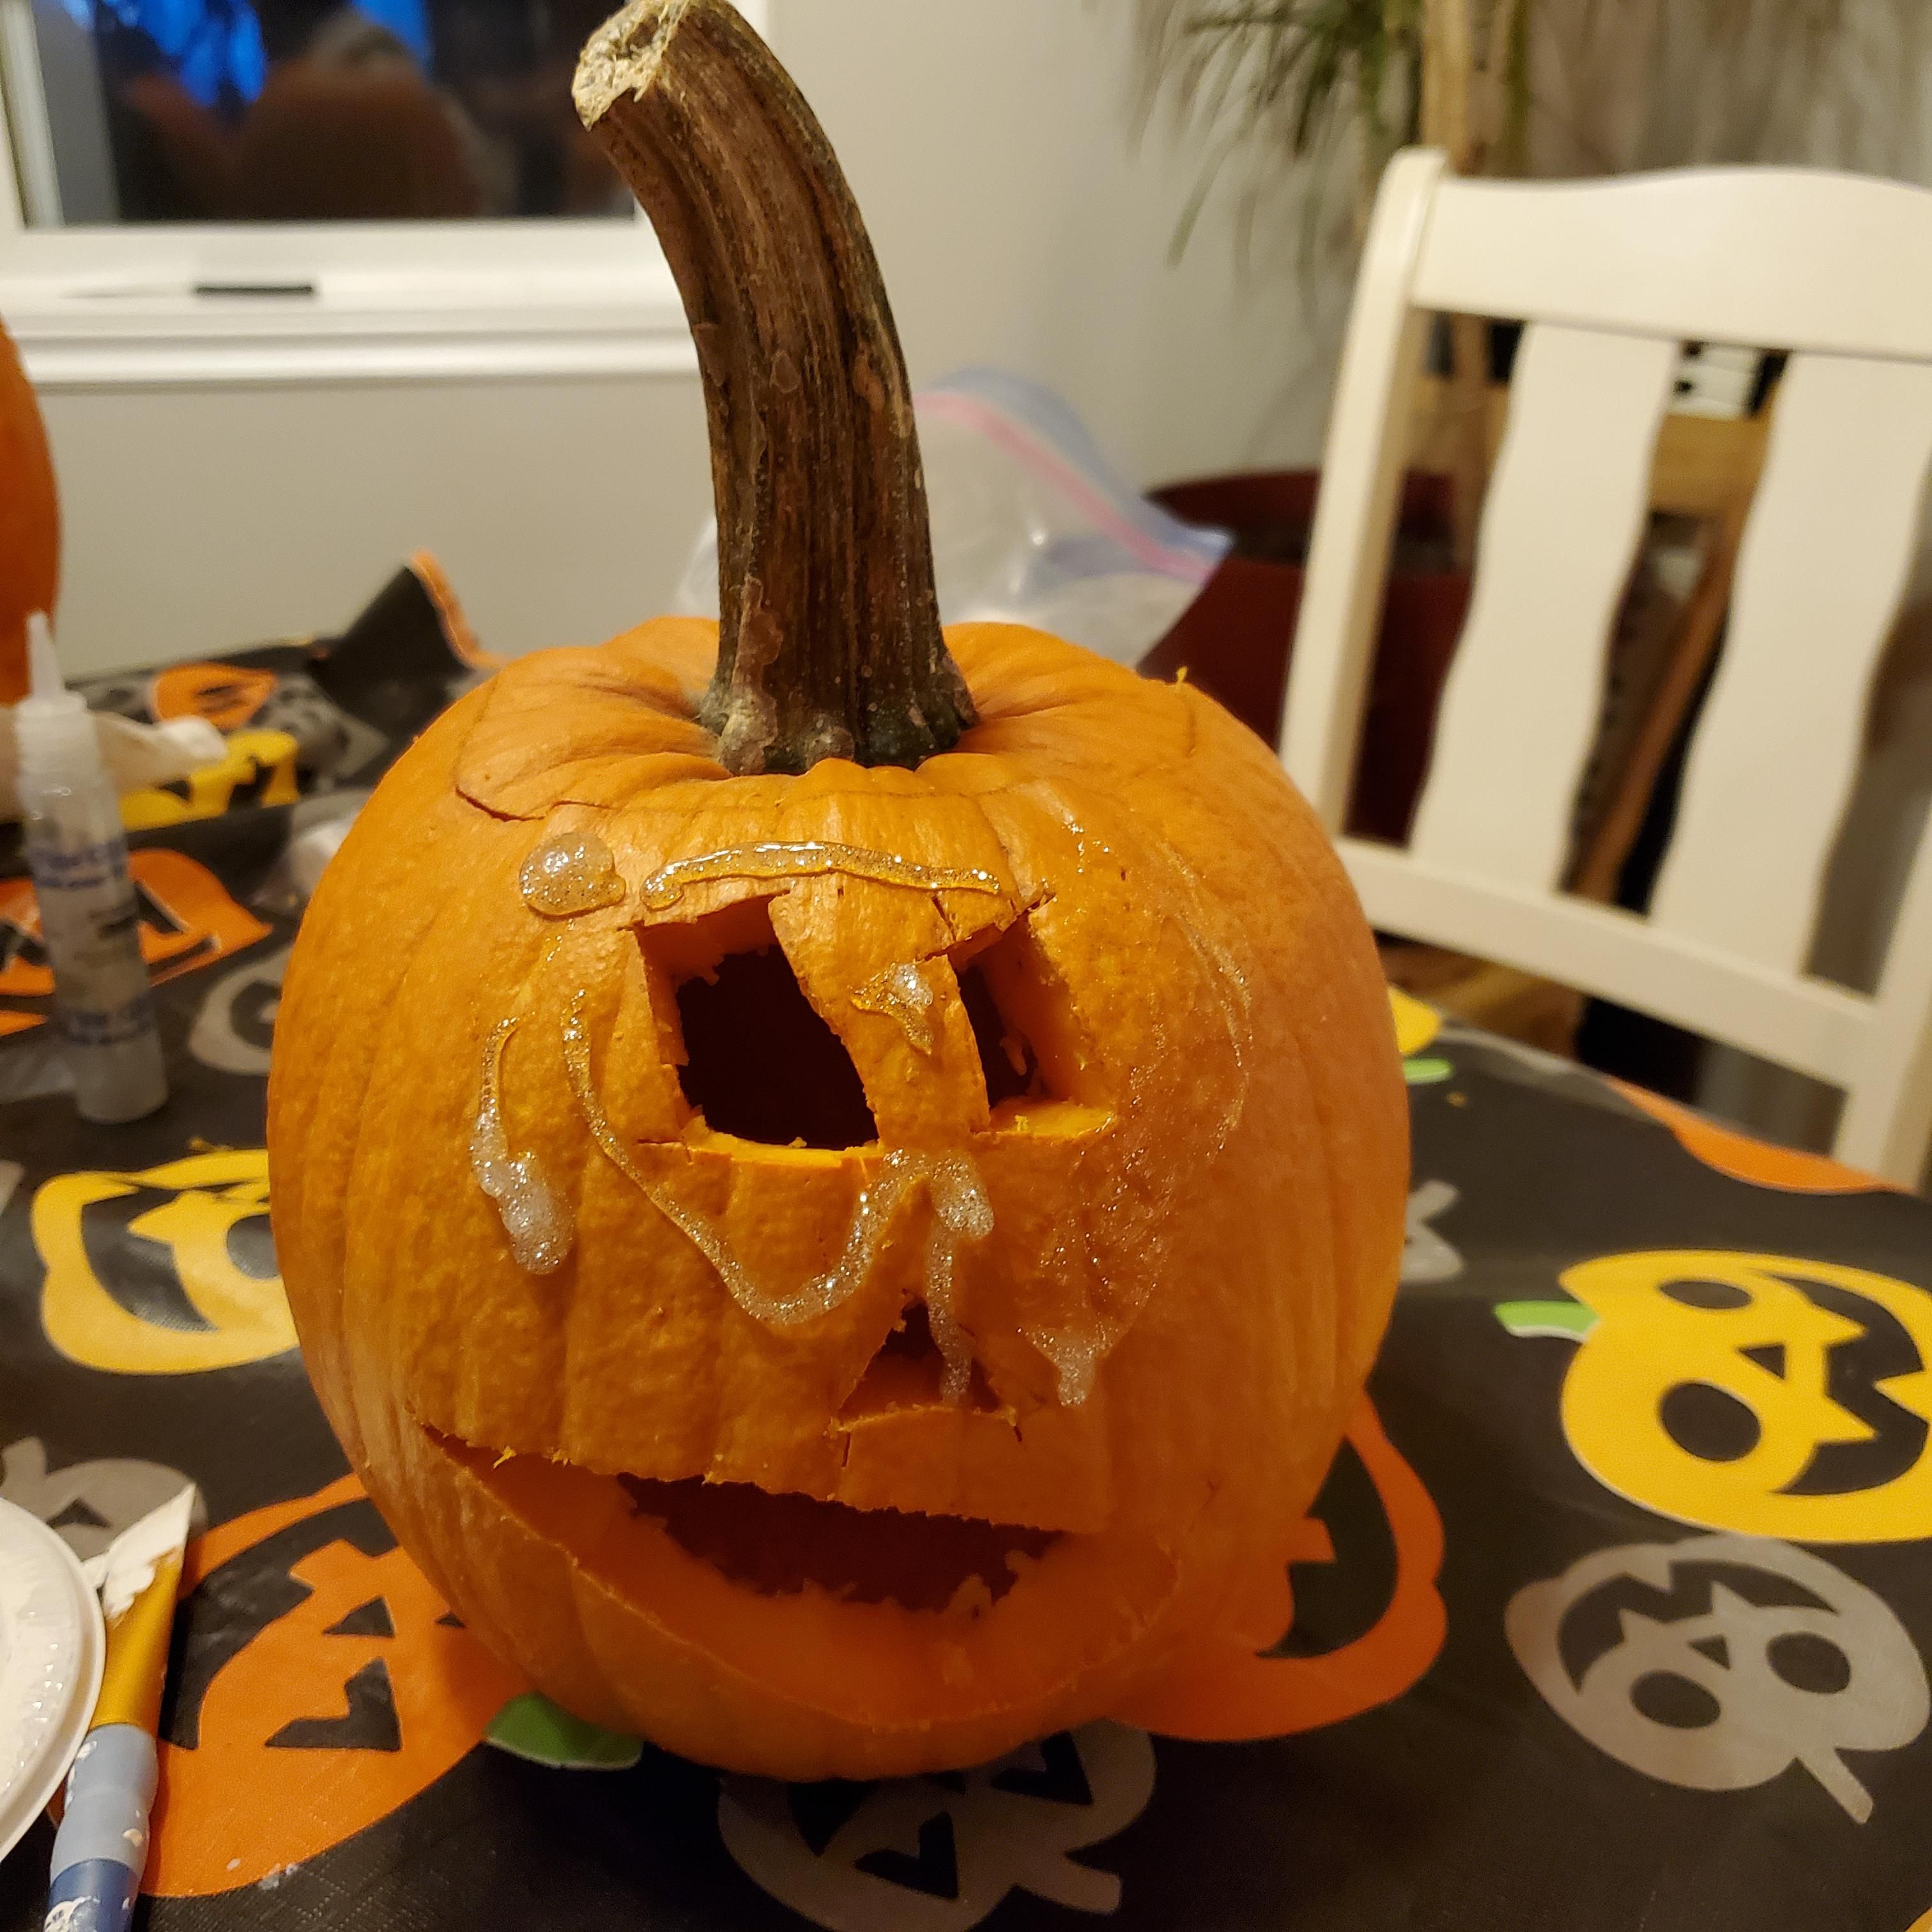 Our little neighbor friend made his first pumpkin. I managed to not laugh out loud at the added glitter.